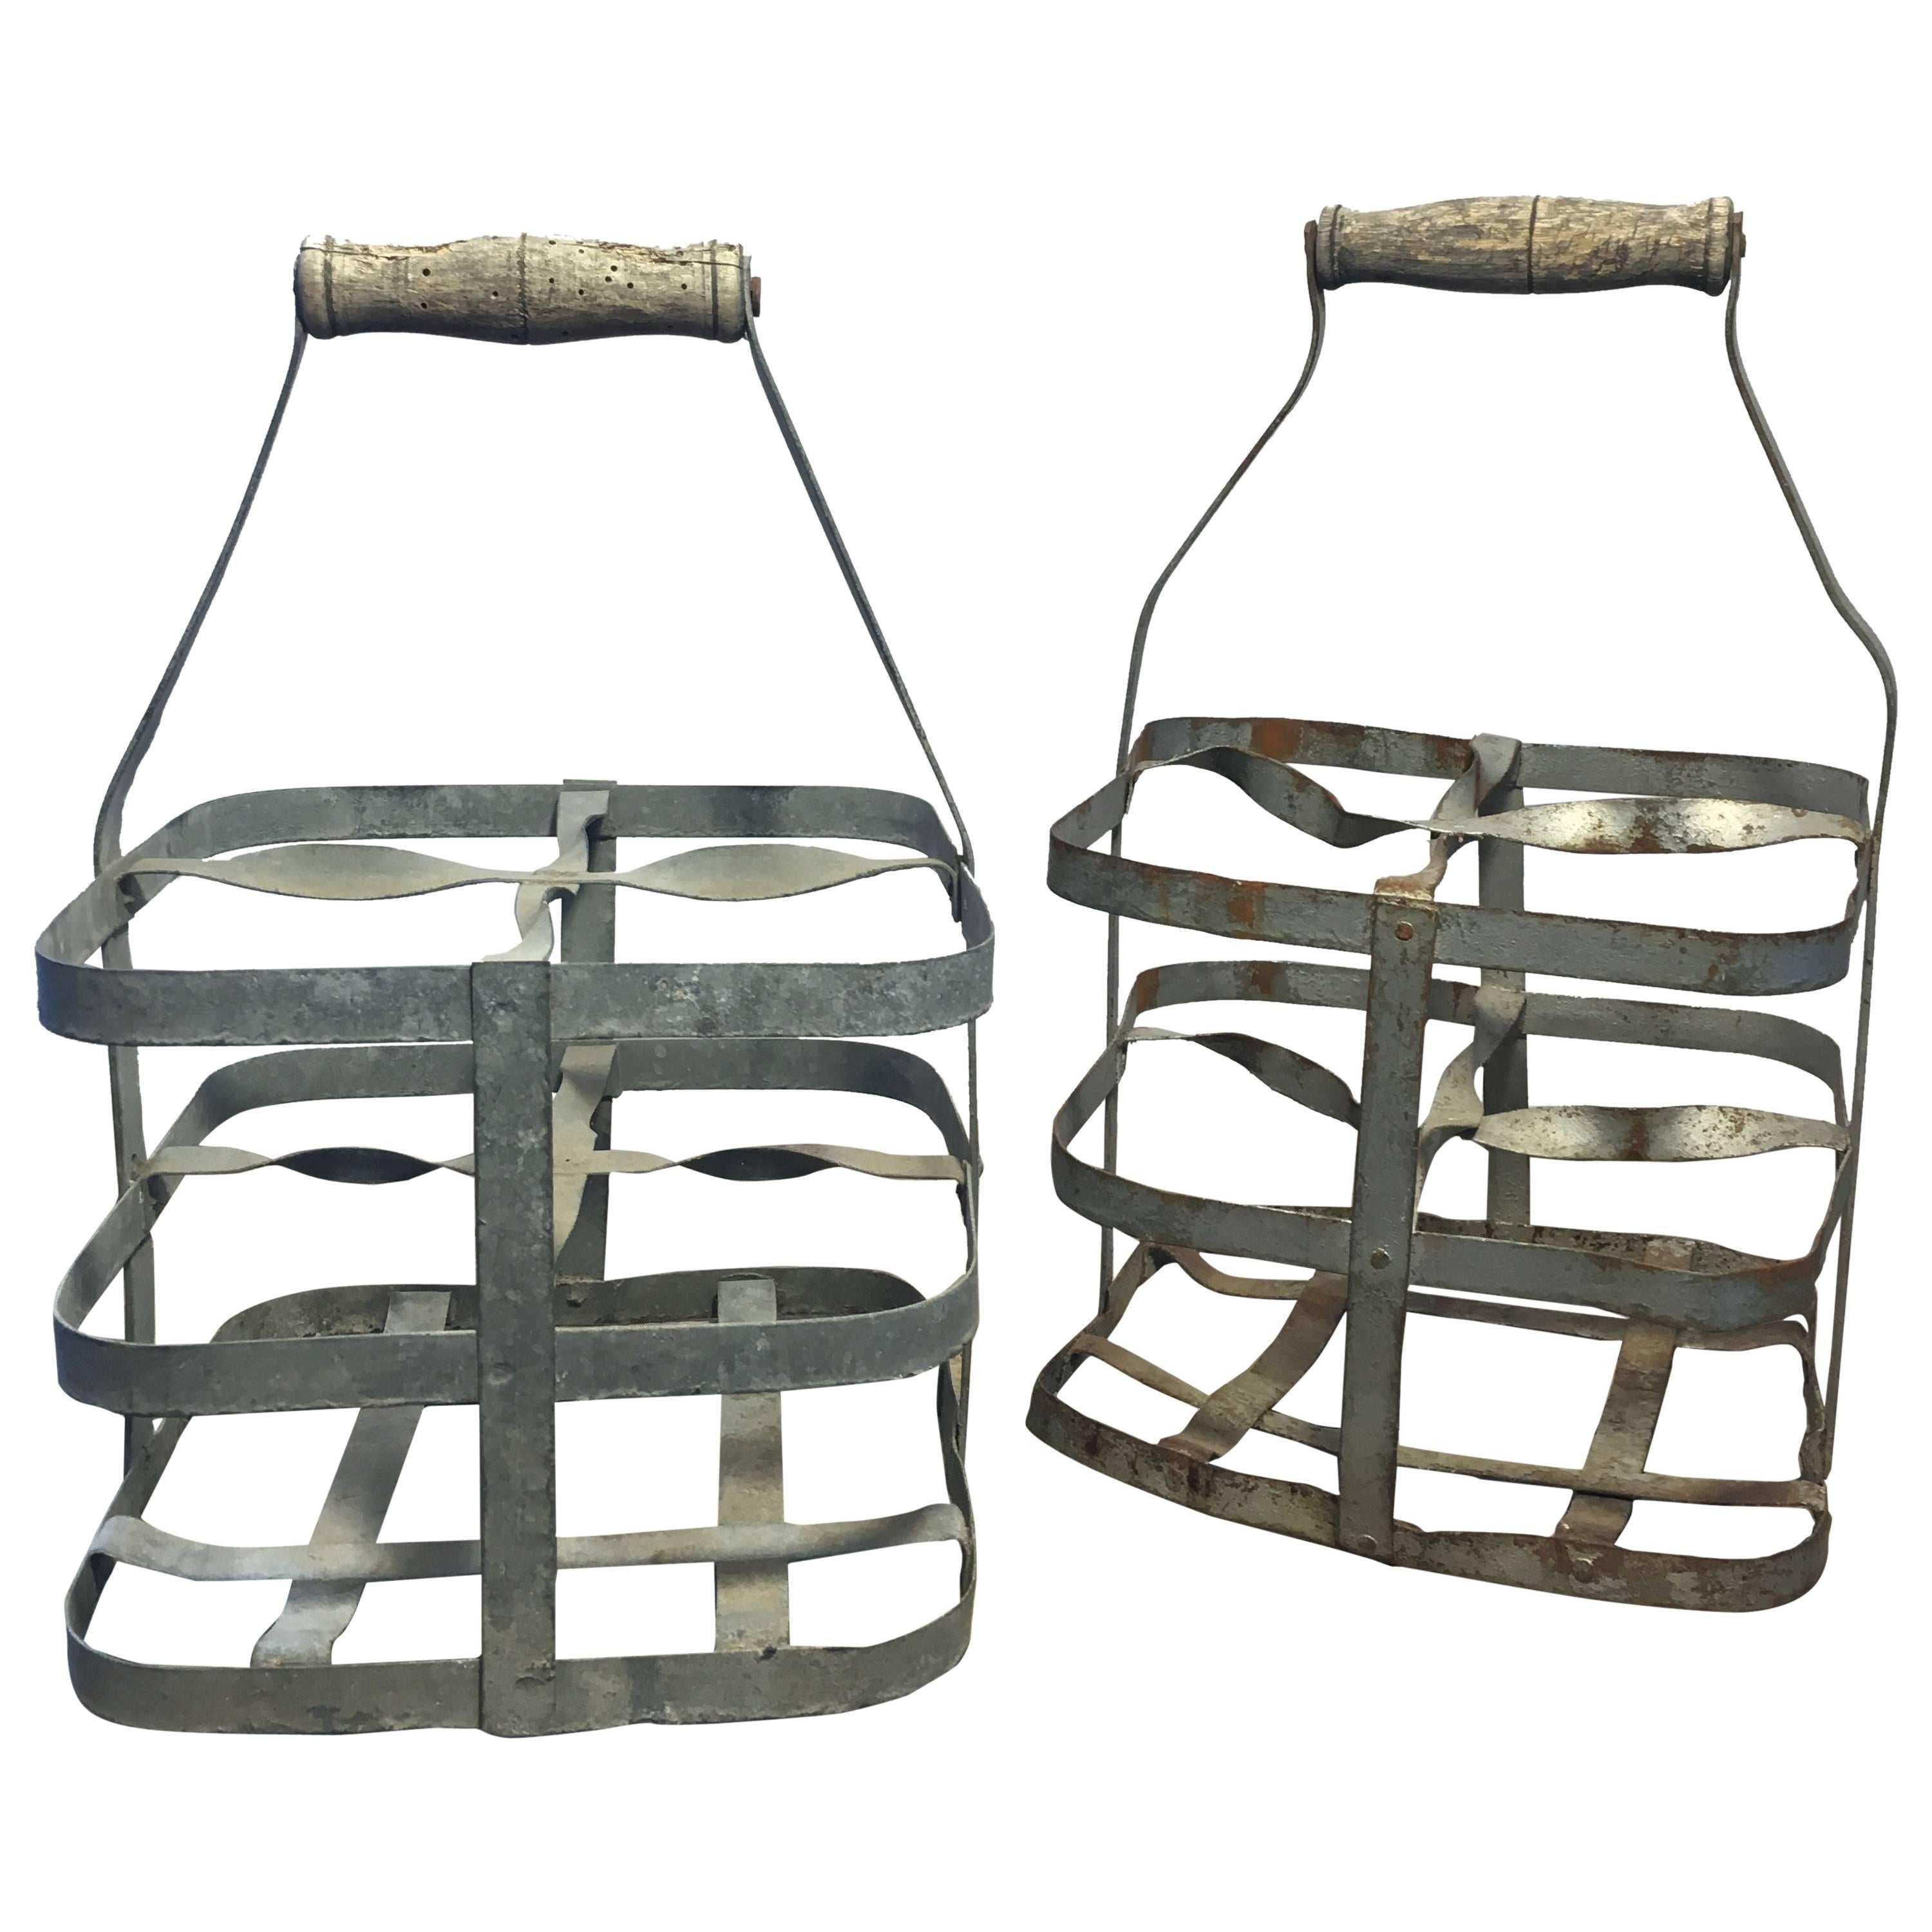 Early 20th Century Vintage French Four-Bottle Wine Carrier Baskets For Sale